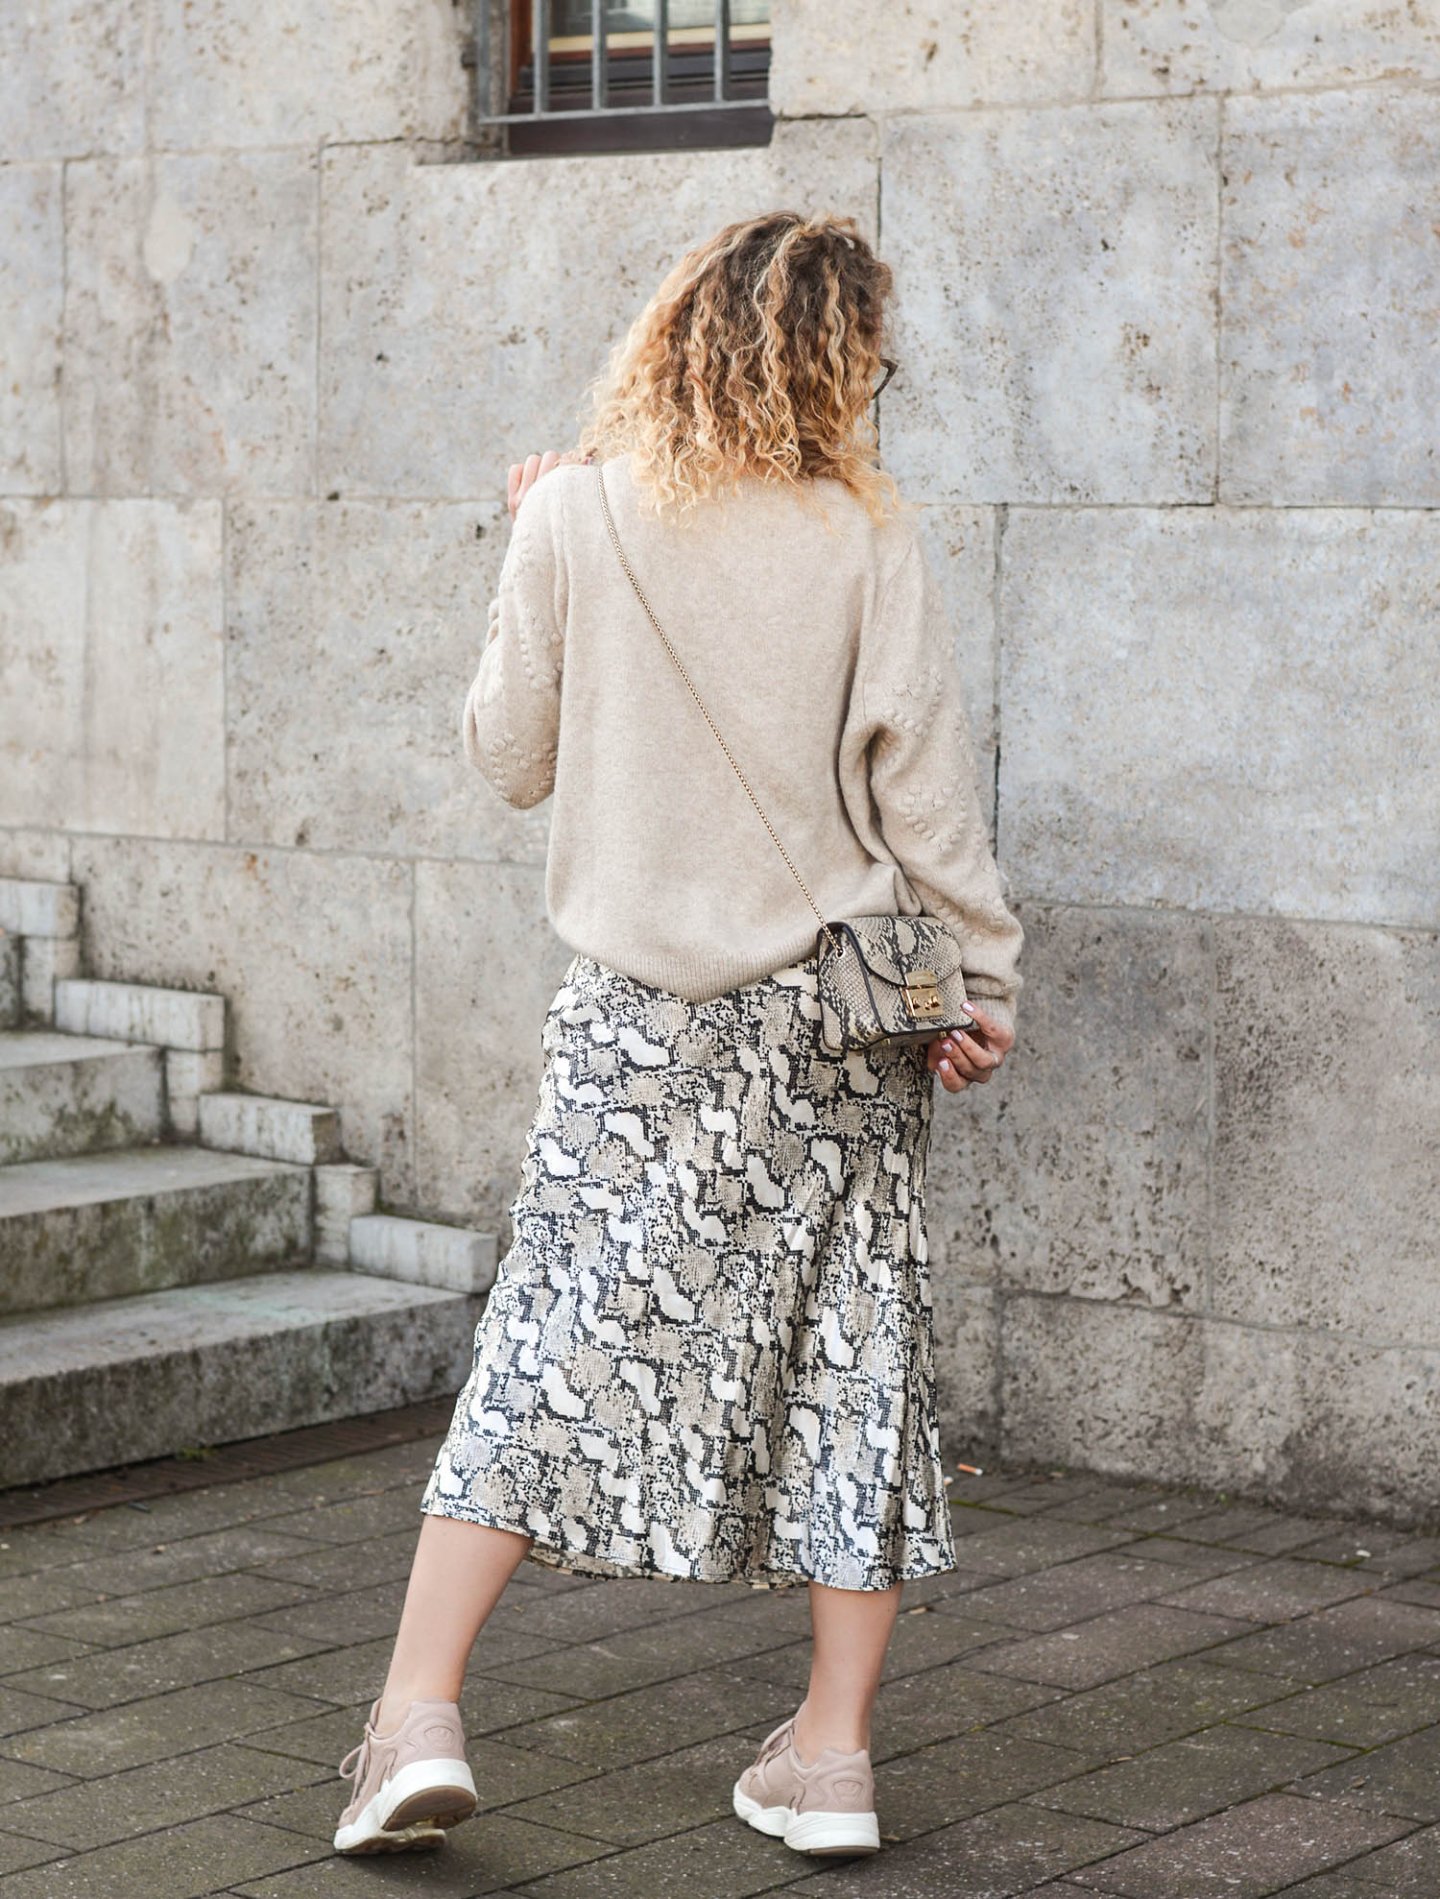 Monochromer-Look-mit-Snake-Print-Kationette-Fashionblog-Germany-Outfit